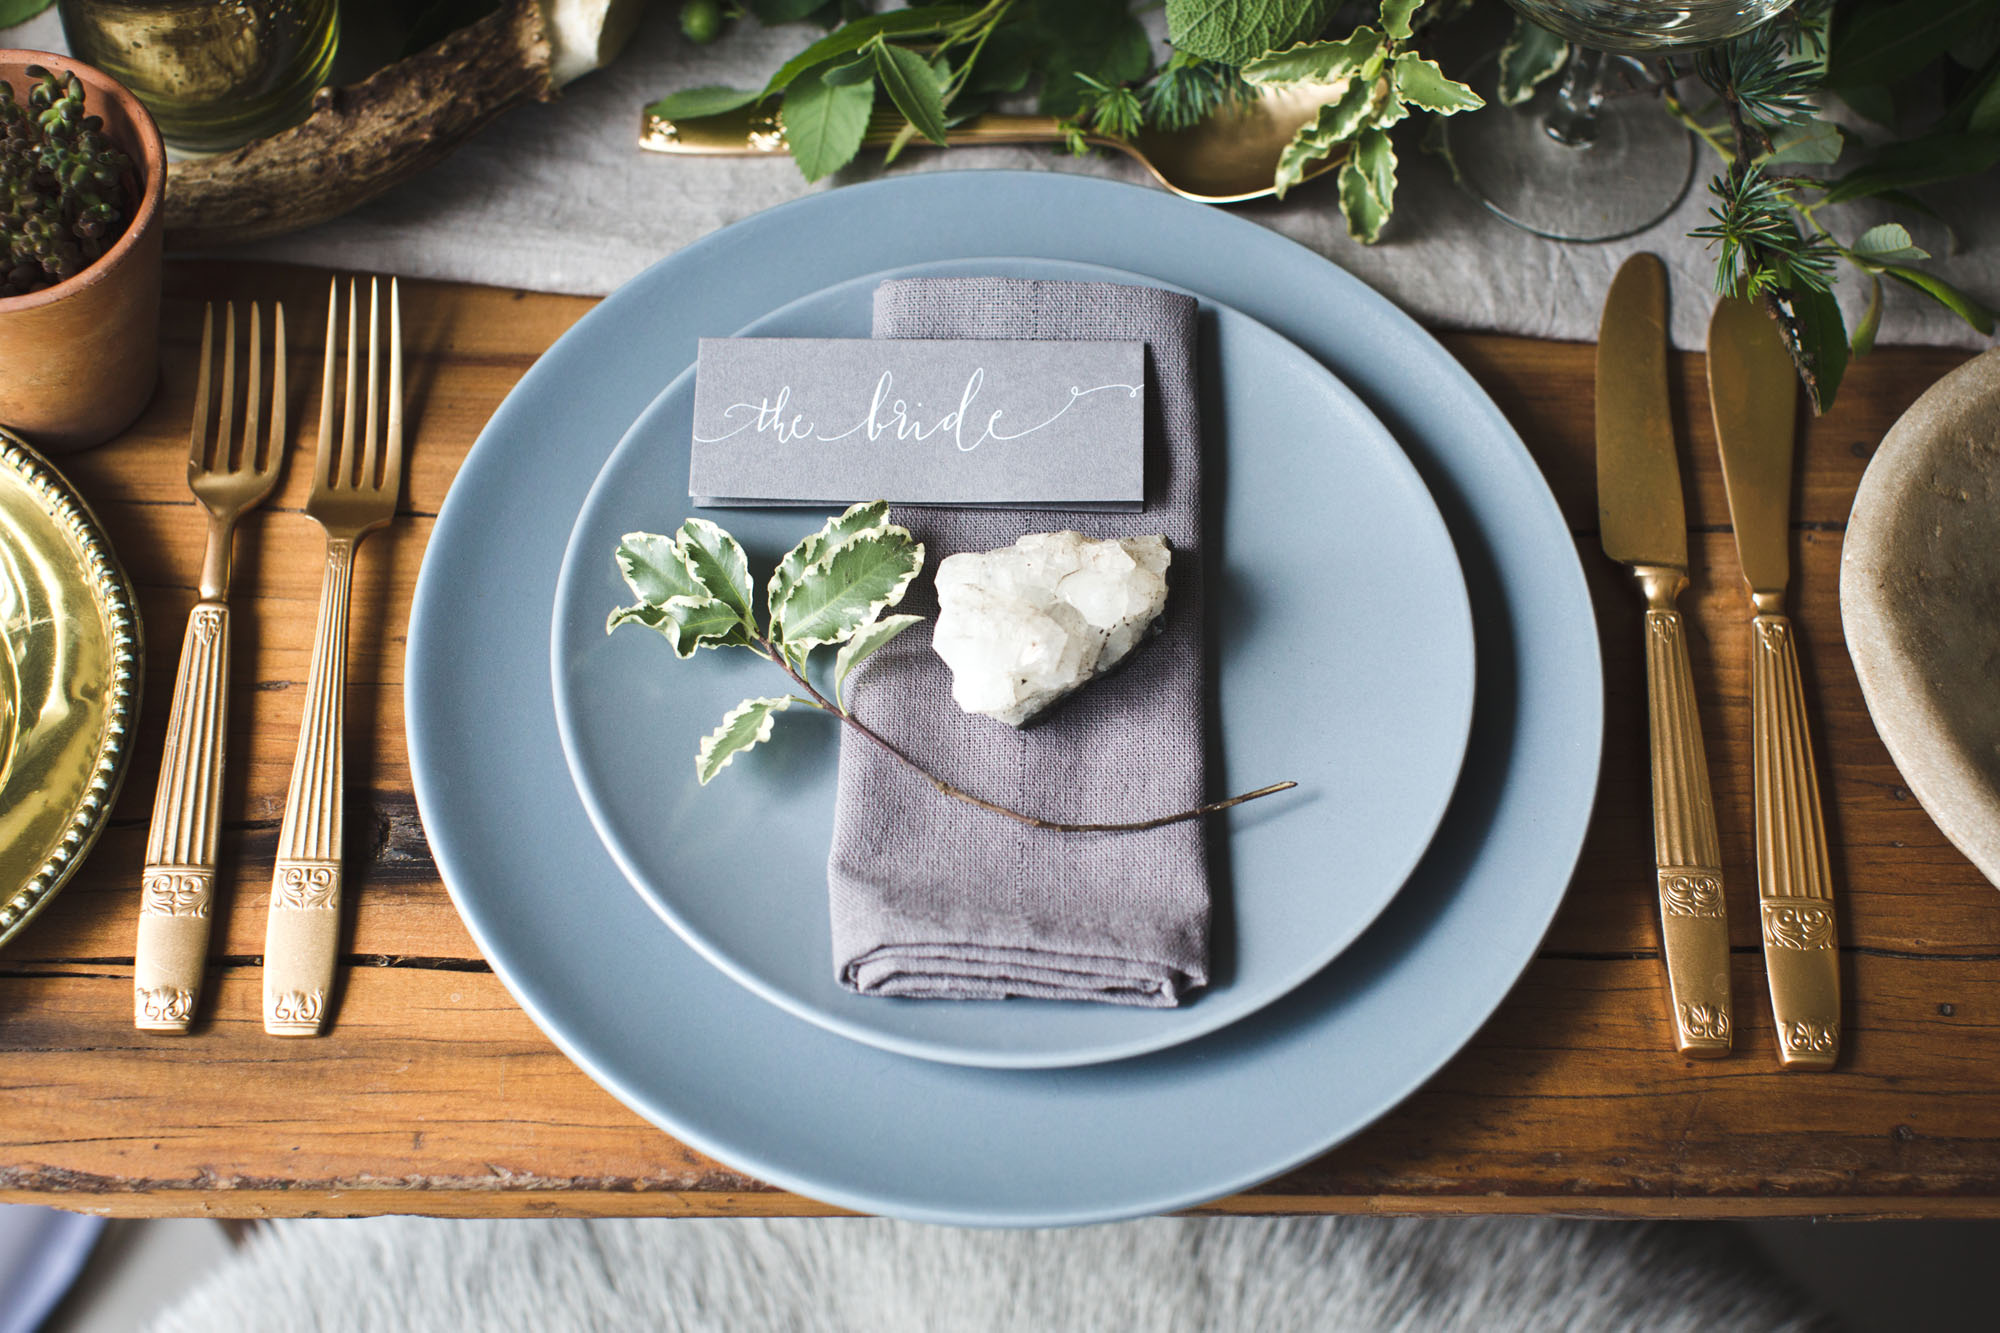 A grey place name with swirly calligraphy saying "the bride" sits on a grey napkin on dusky blue plates, with foliage around